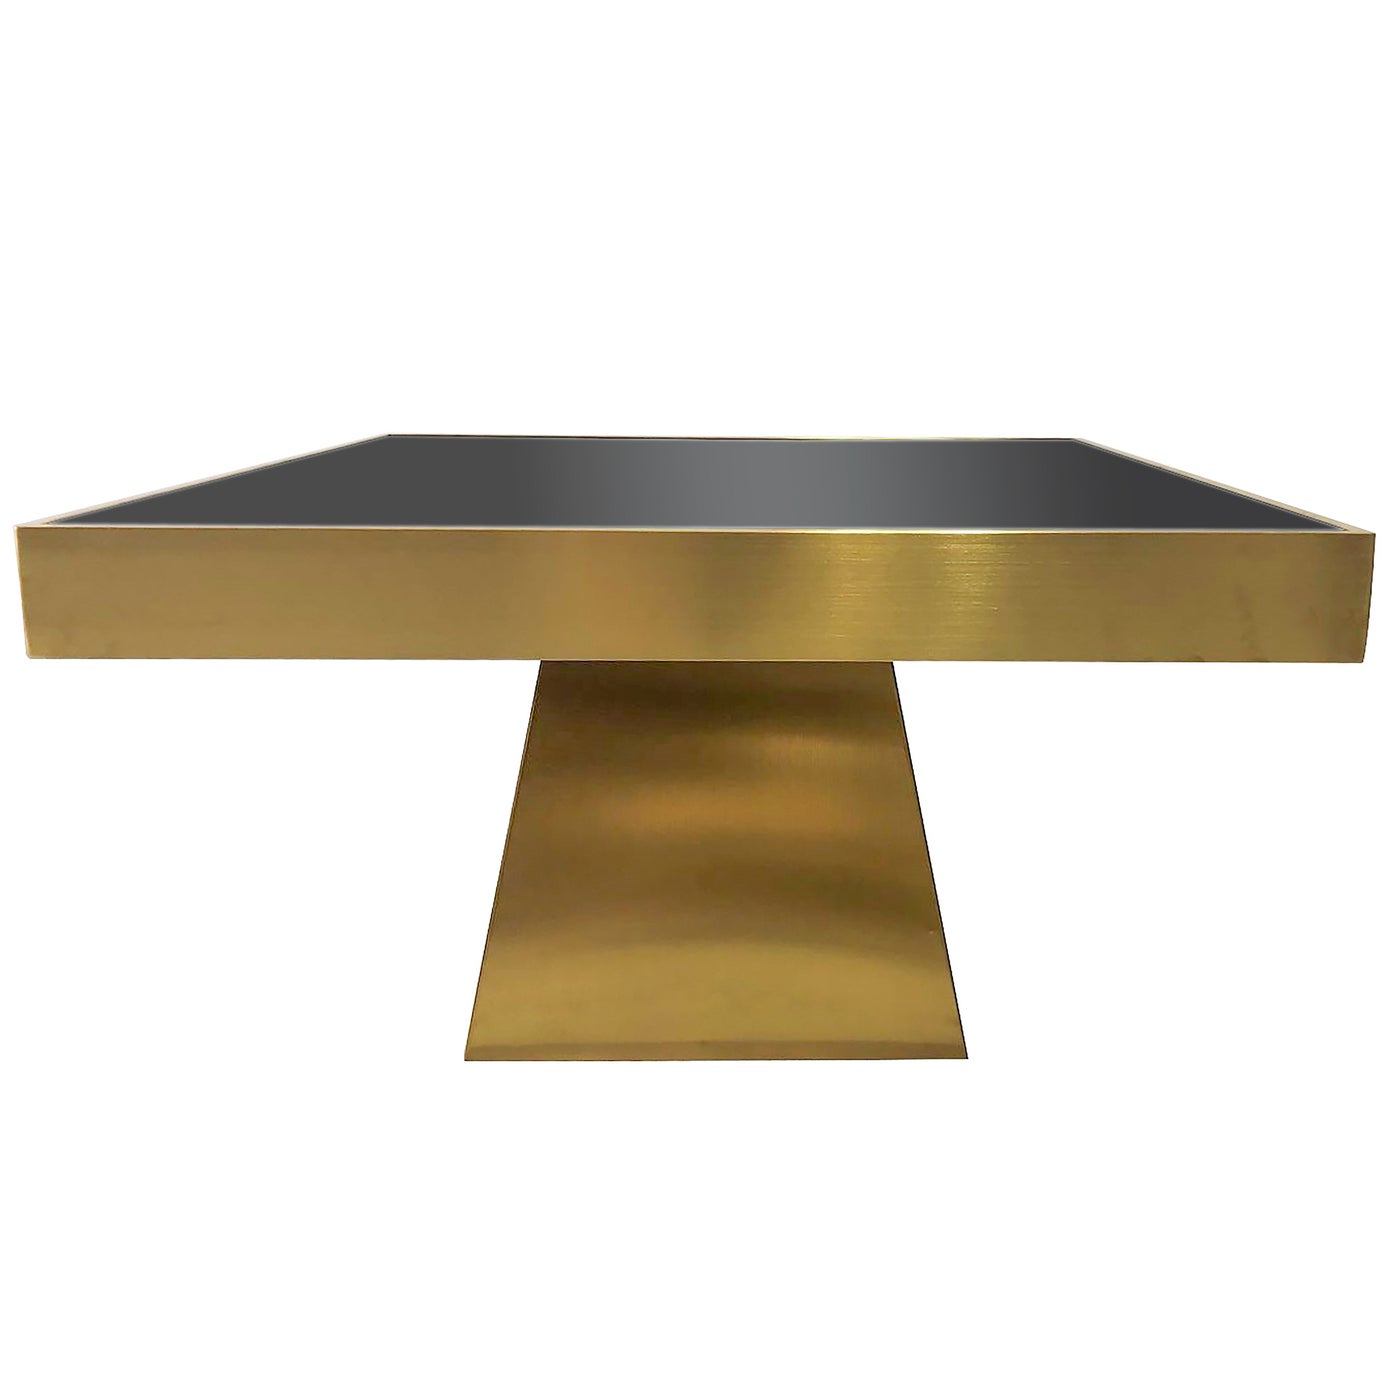 BRYANT COFFEE TABLE | Brushed Gold Finish on Metal with Black Glass Top